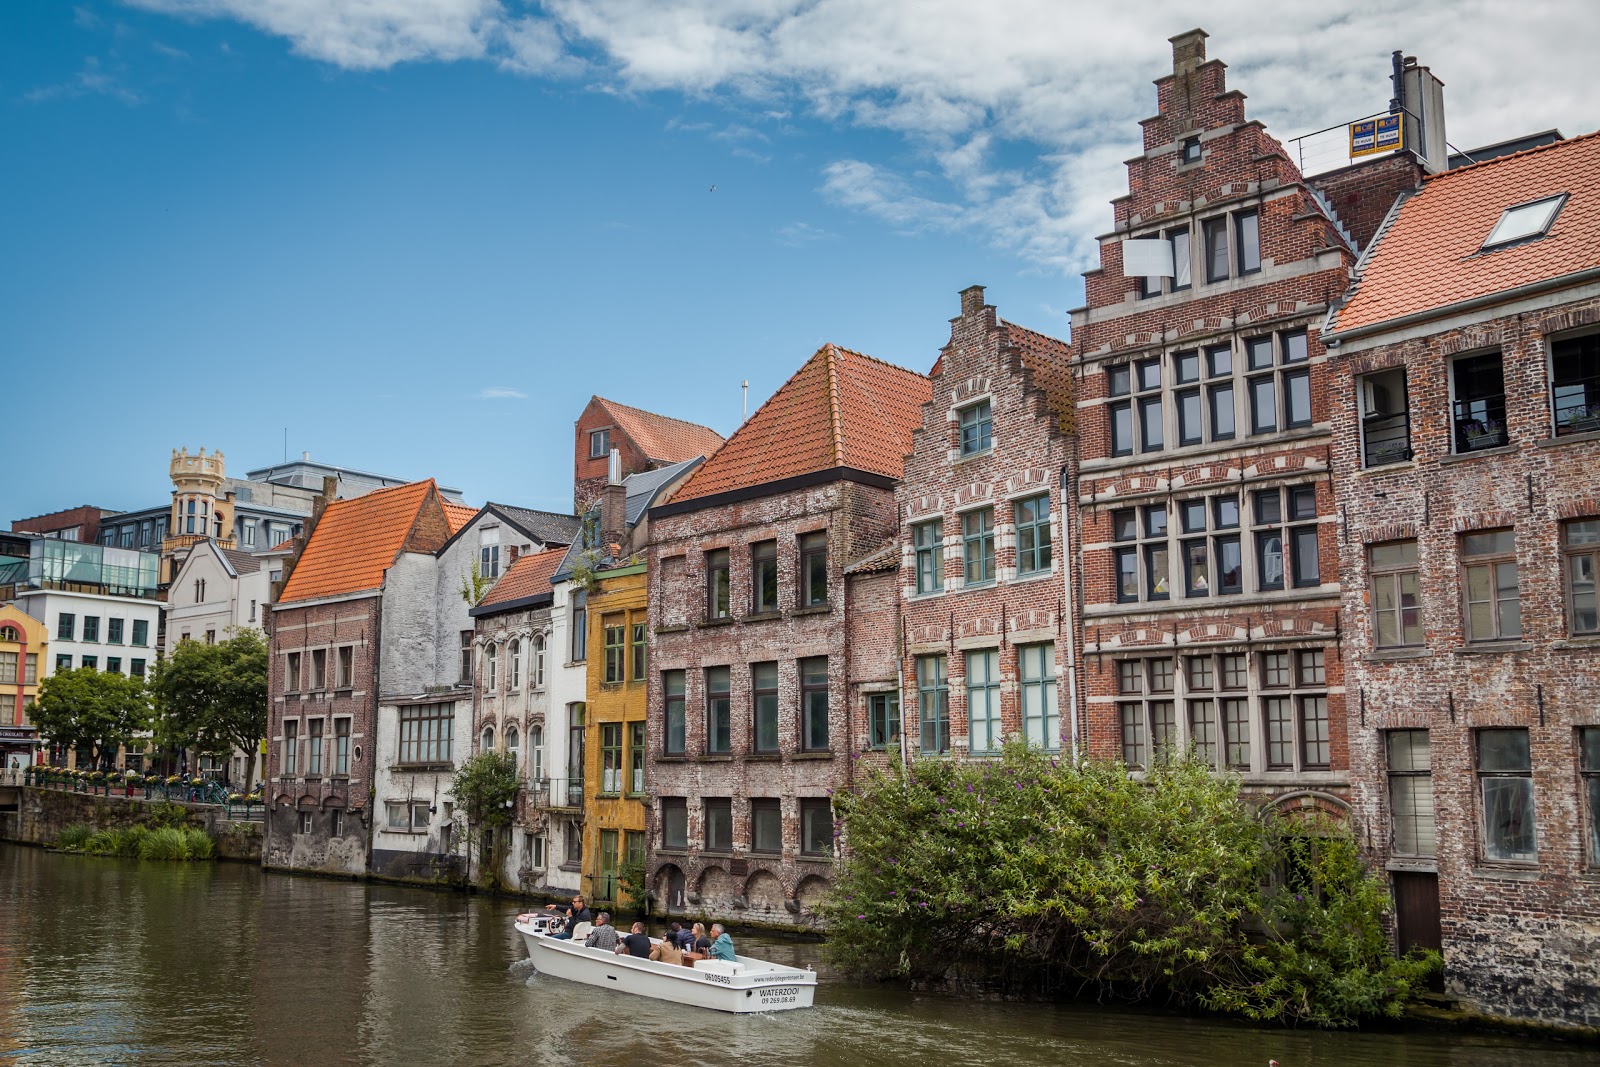 Ghent, Gent, or Gand? - Explore the World with Simon Sulyma